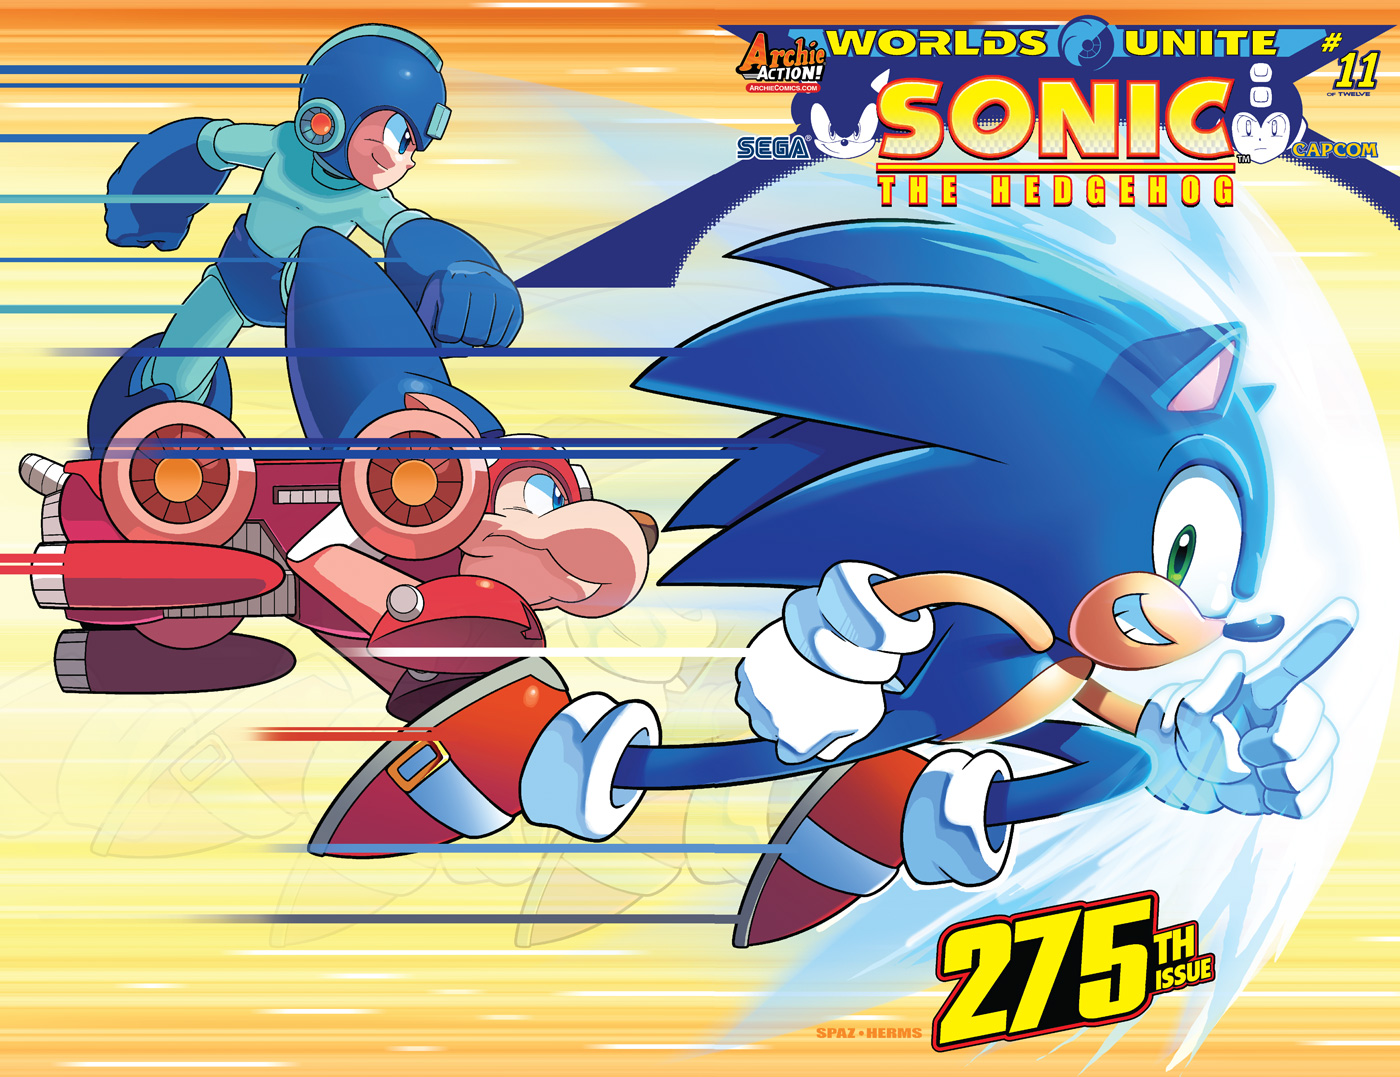 Preview the Archie Comics On Sale Today Including Sonic the Hedgehog #275!  – 8/12/15 - Archie Comics